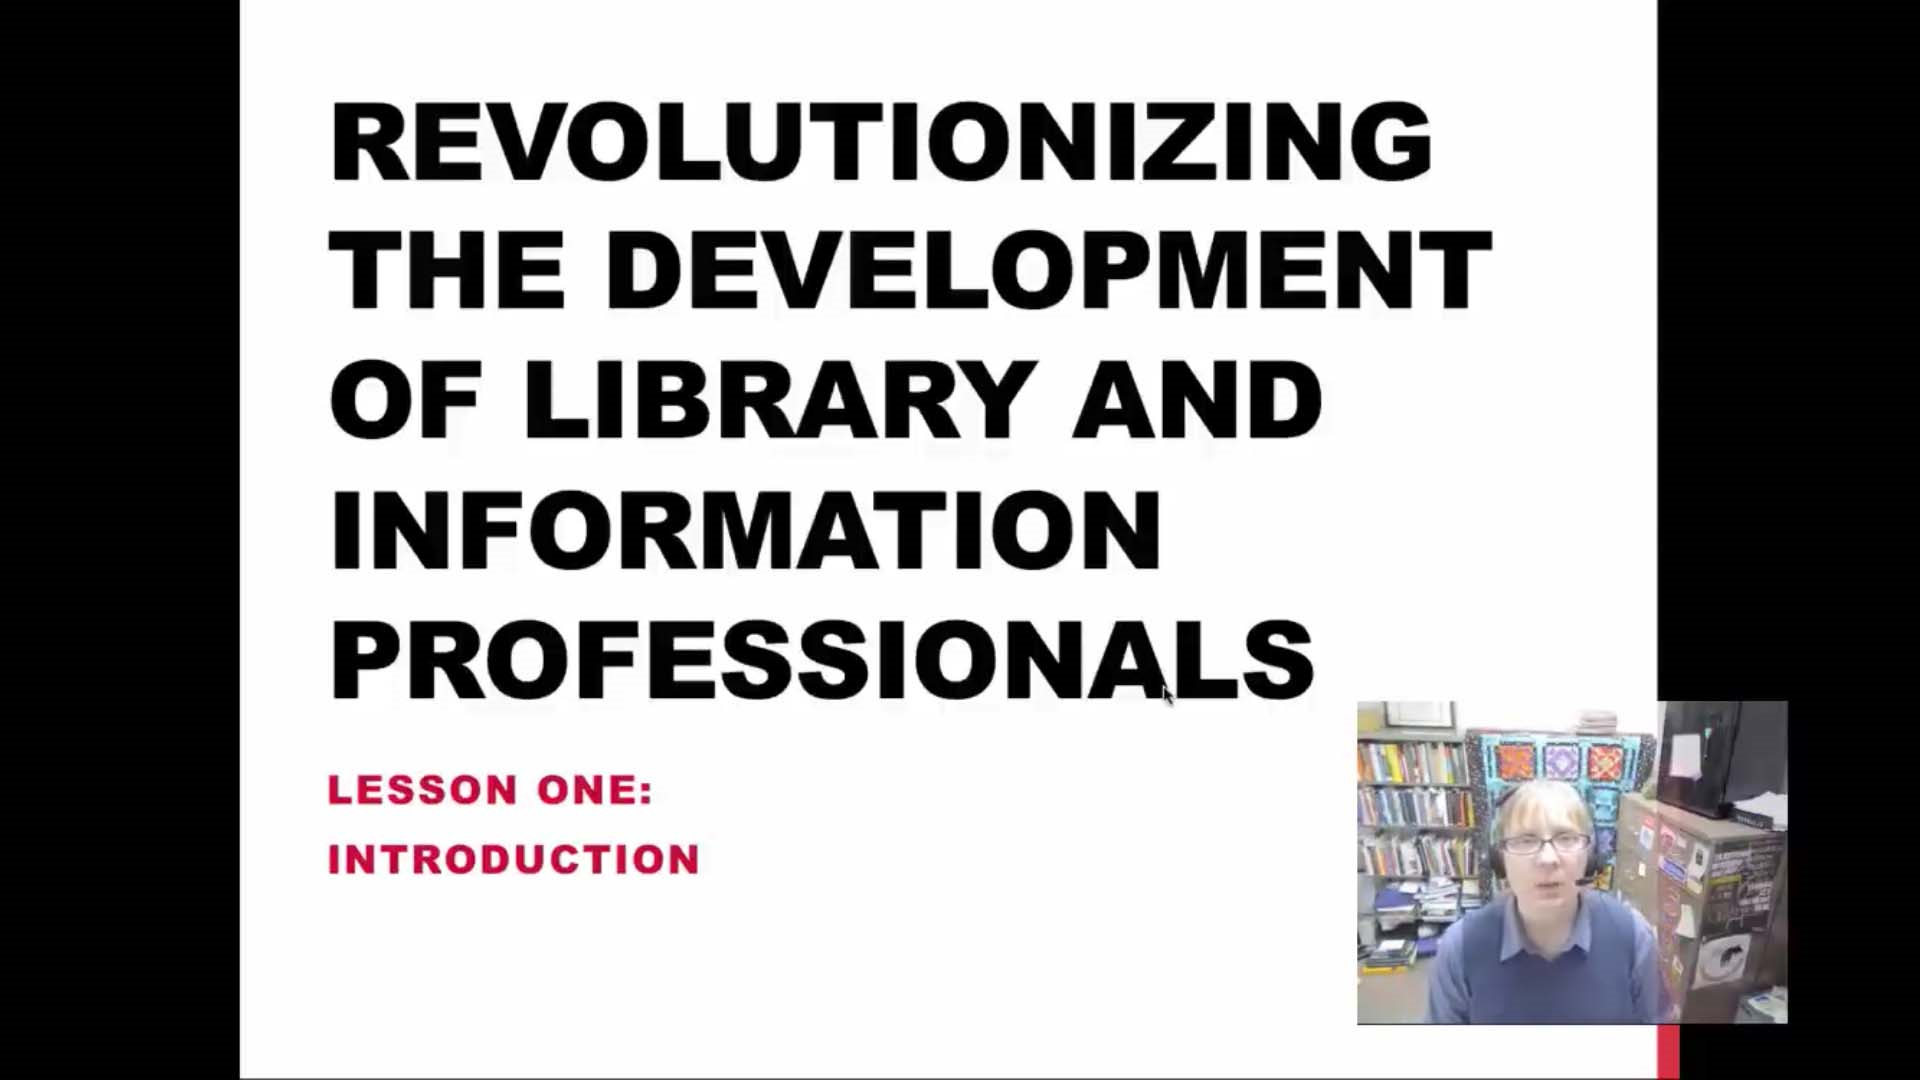 Revolutionizing the Development of Library and Information Professionals